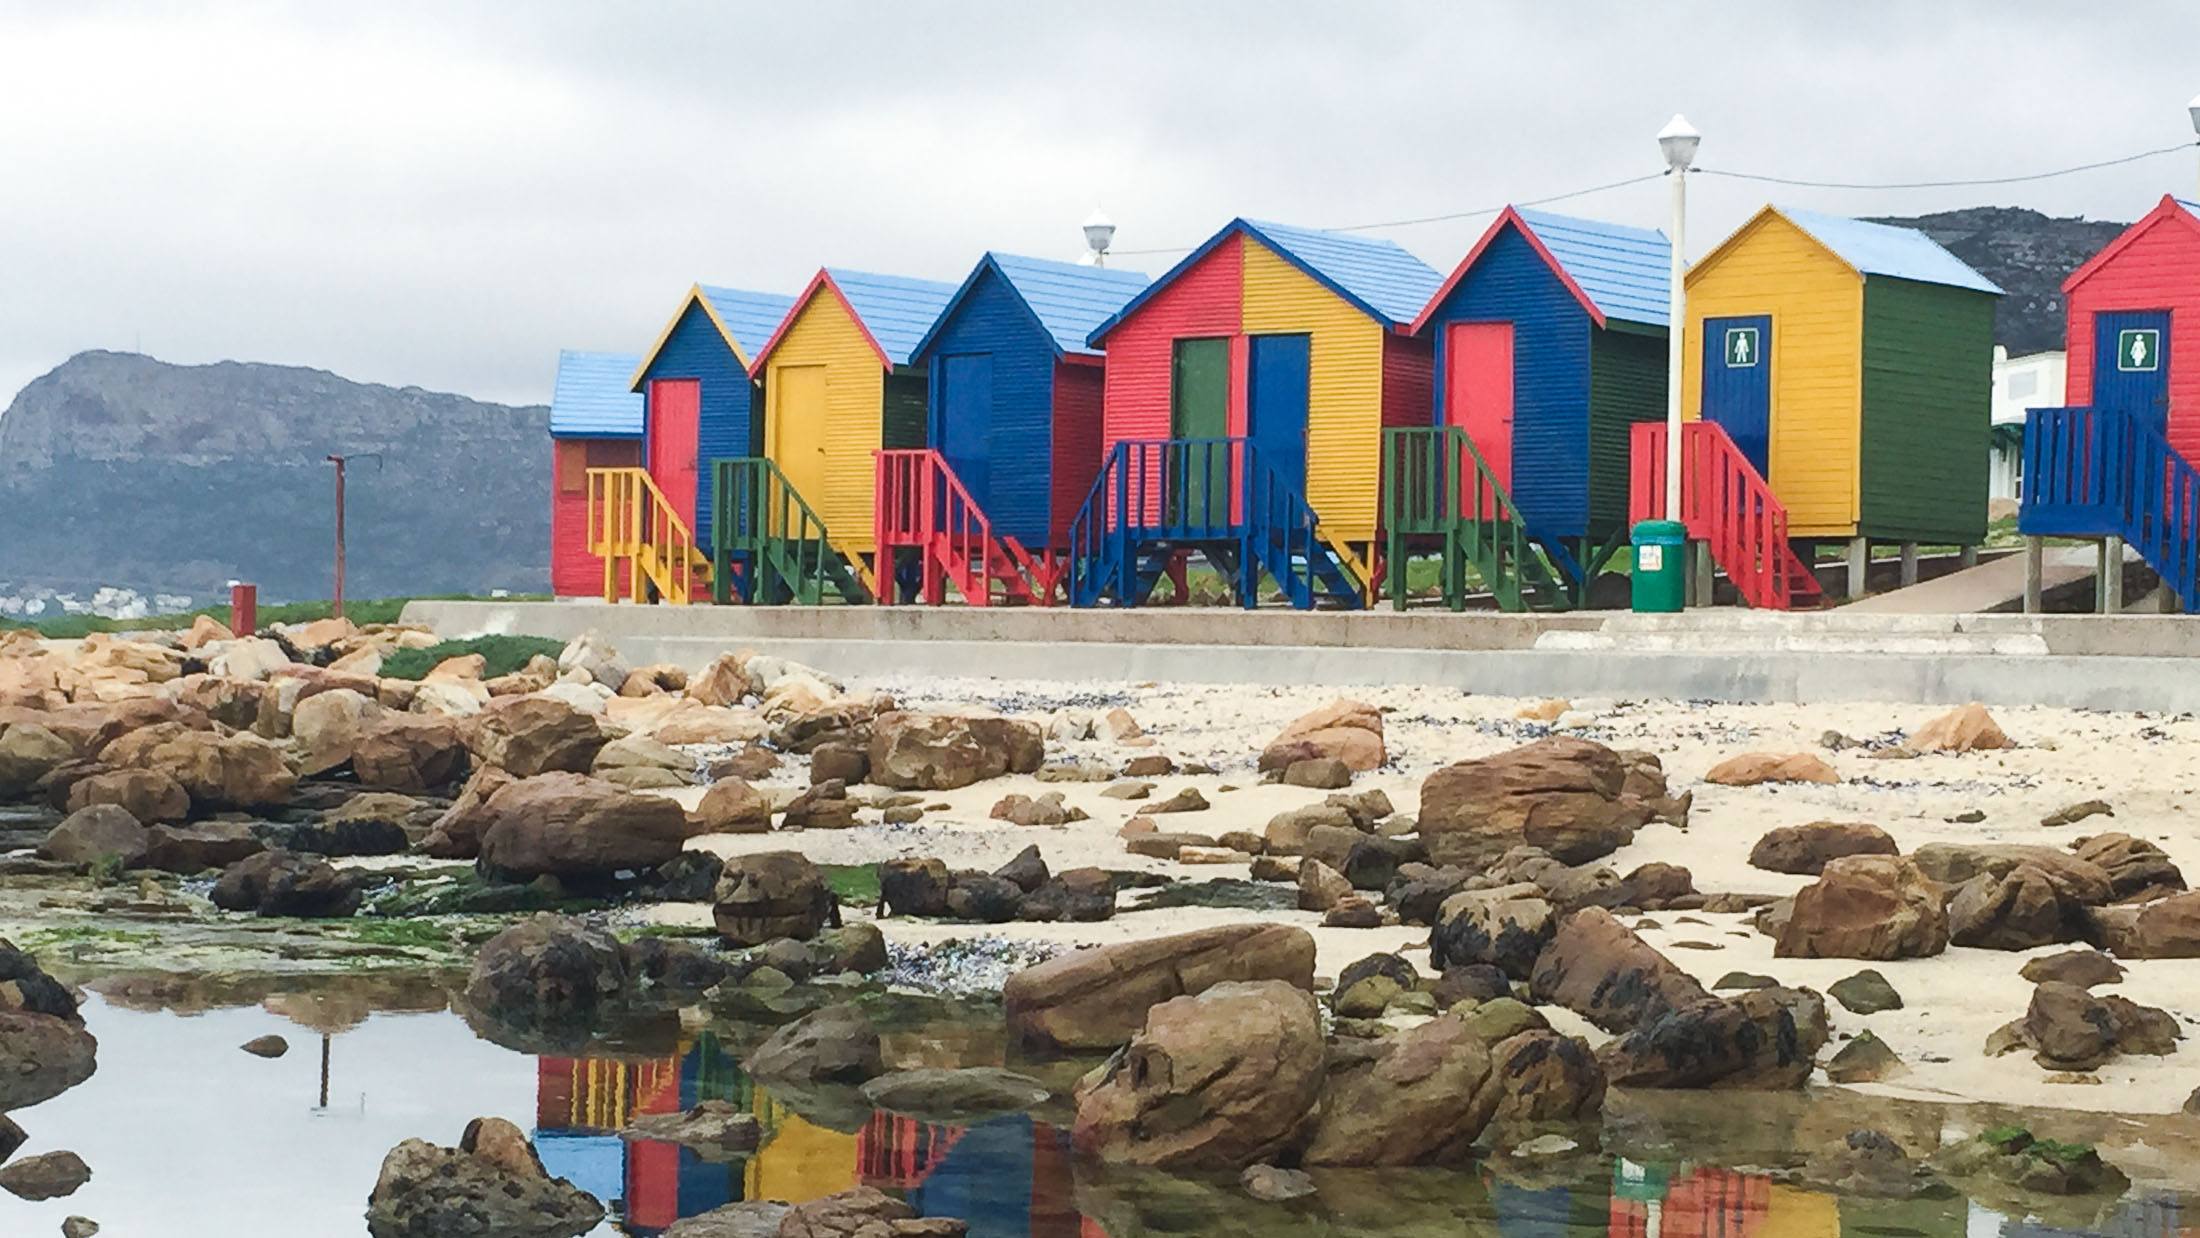 south africa cape town beach guide travel itinerary beaches muizenberg surf beach huts st james capetown sher she goes shershegoes.com